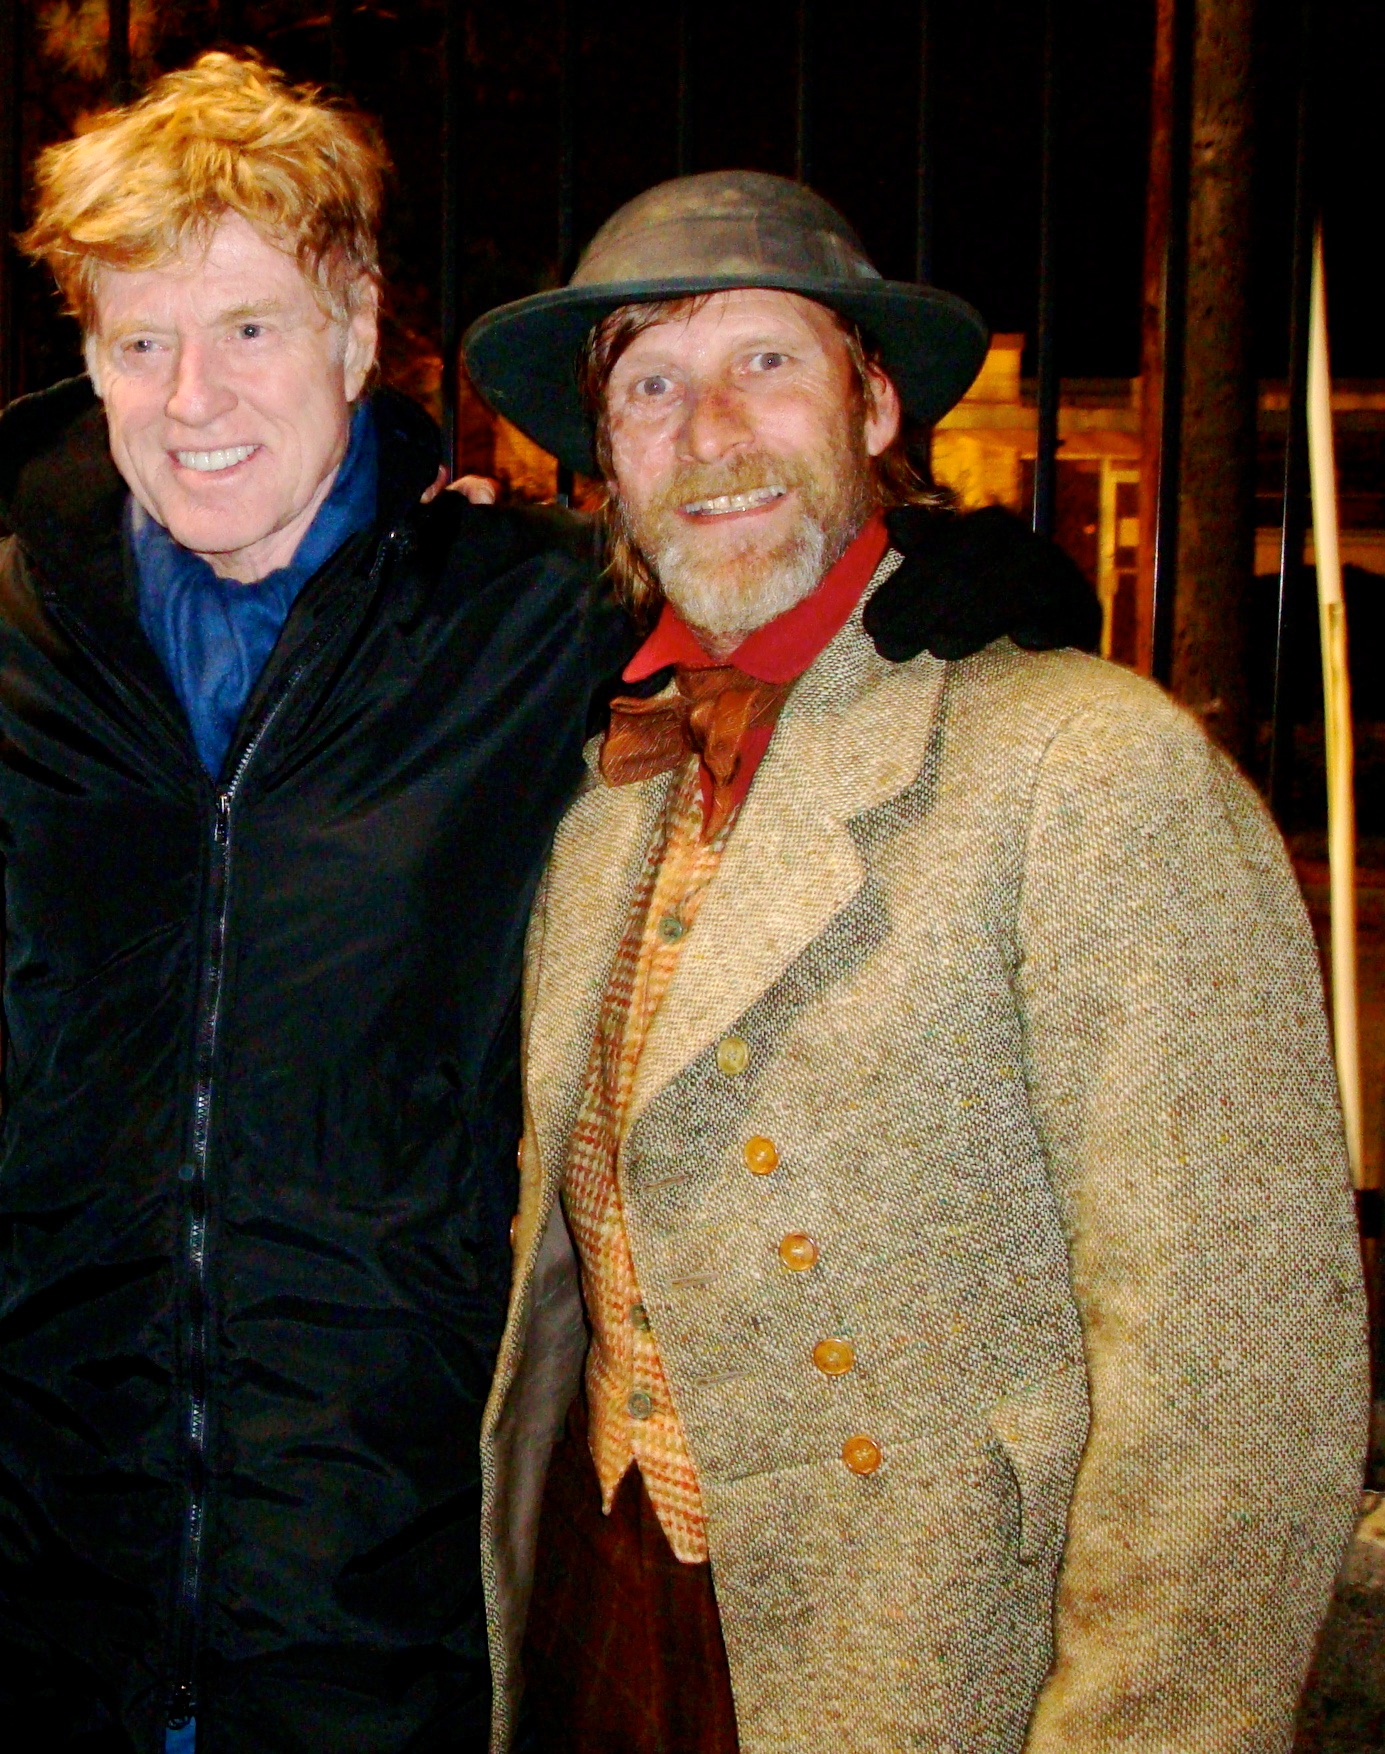 Cosmo and Mr. Robert Redford on his set of The Conspirator in Ga.